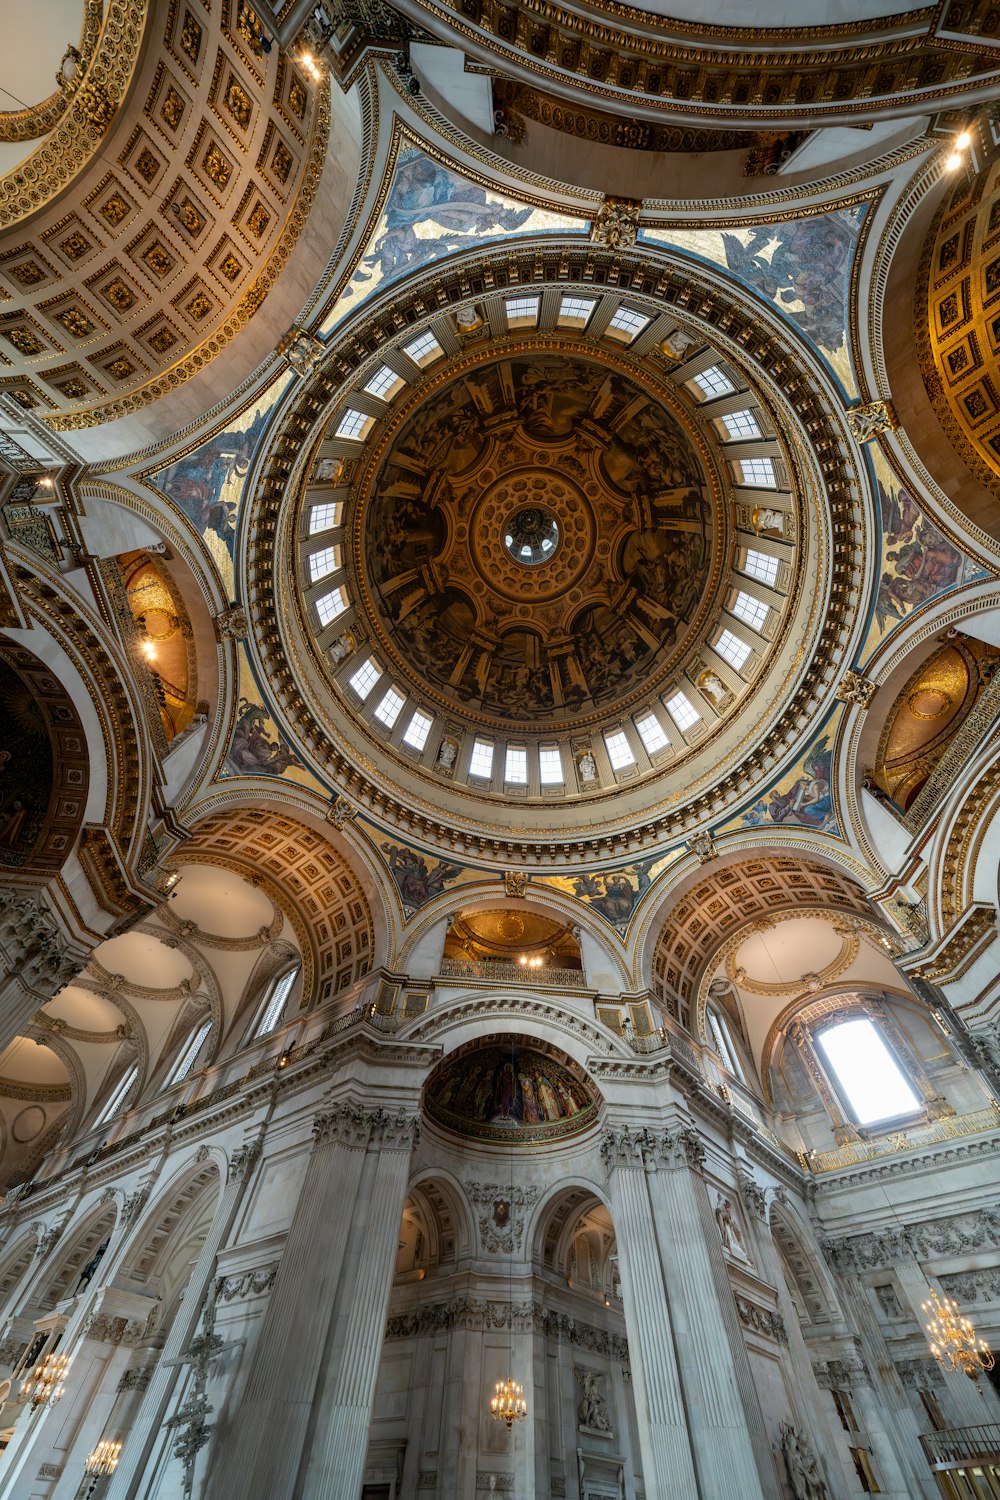 the ceiling of a church with a domed ceiling